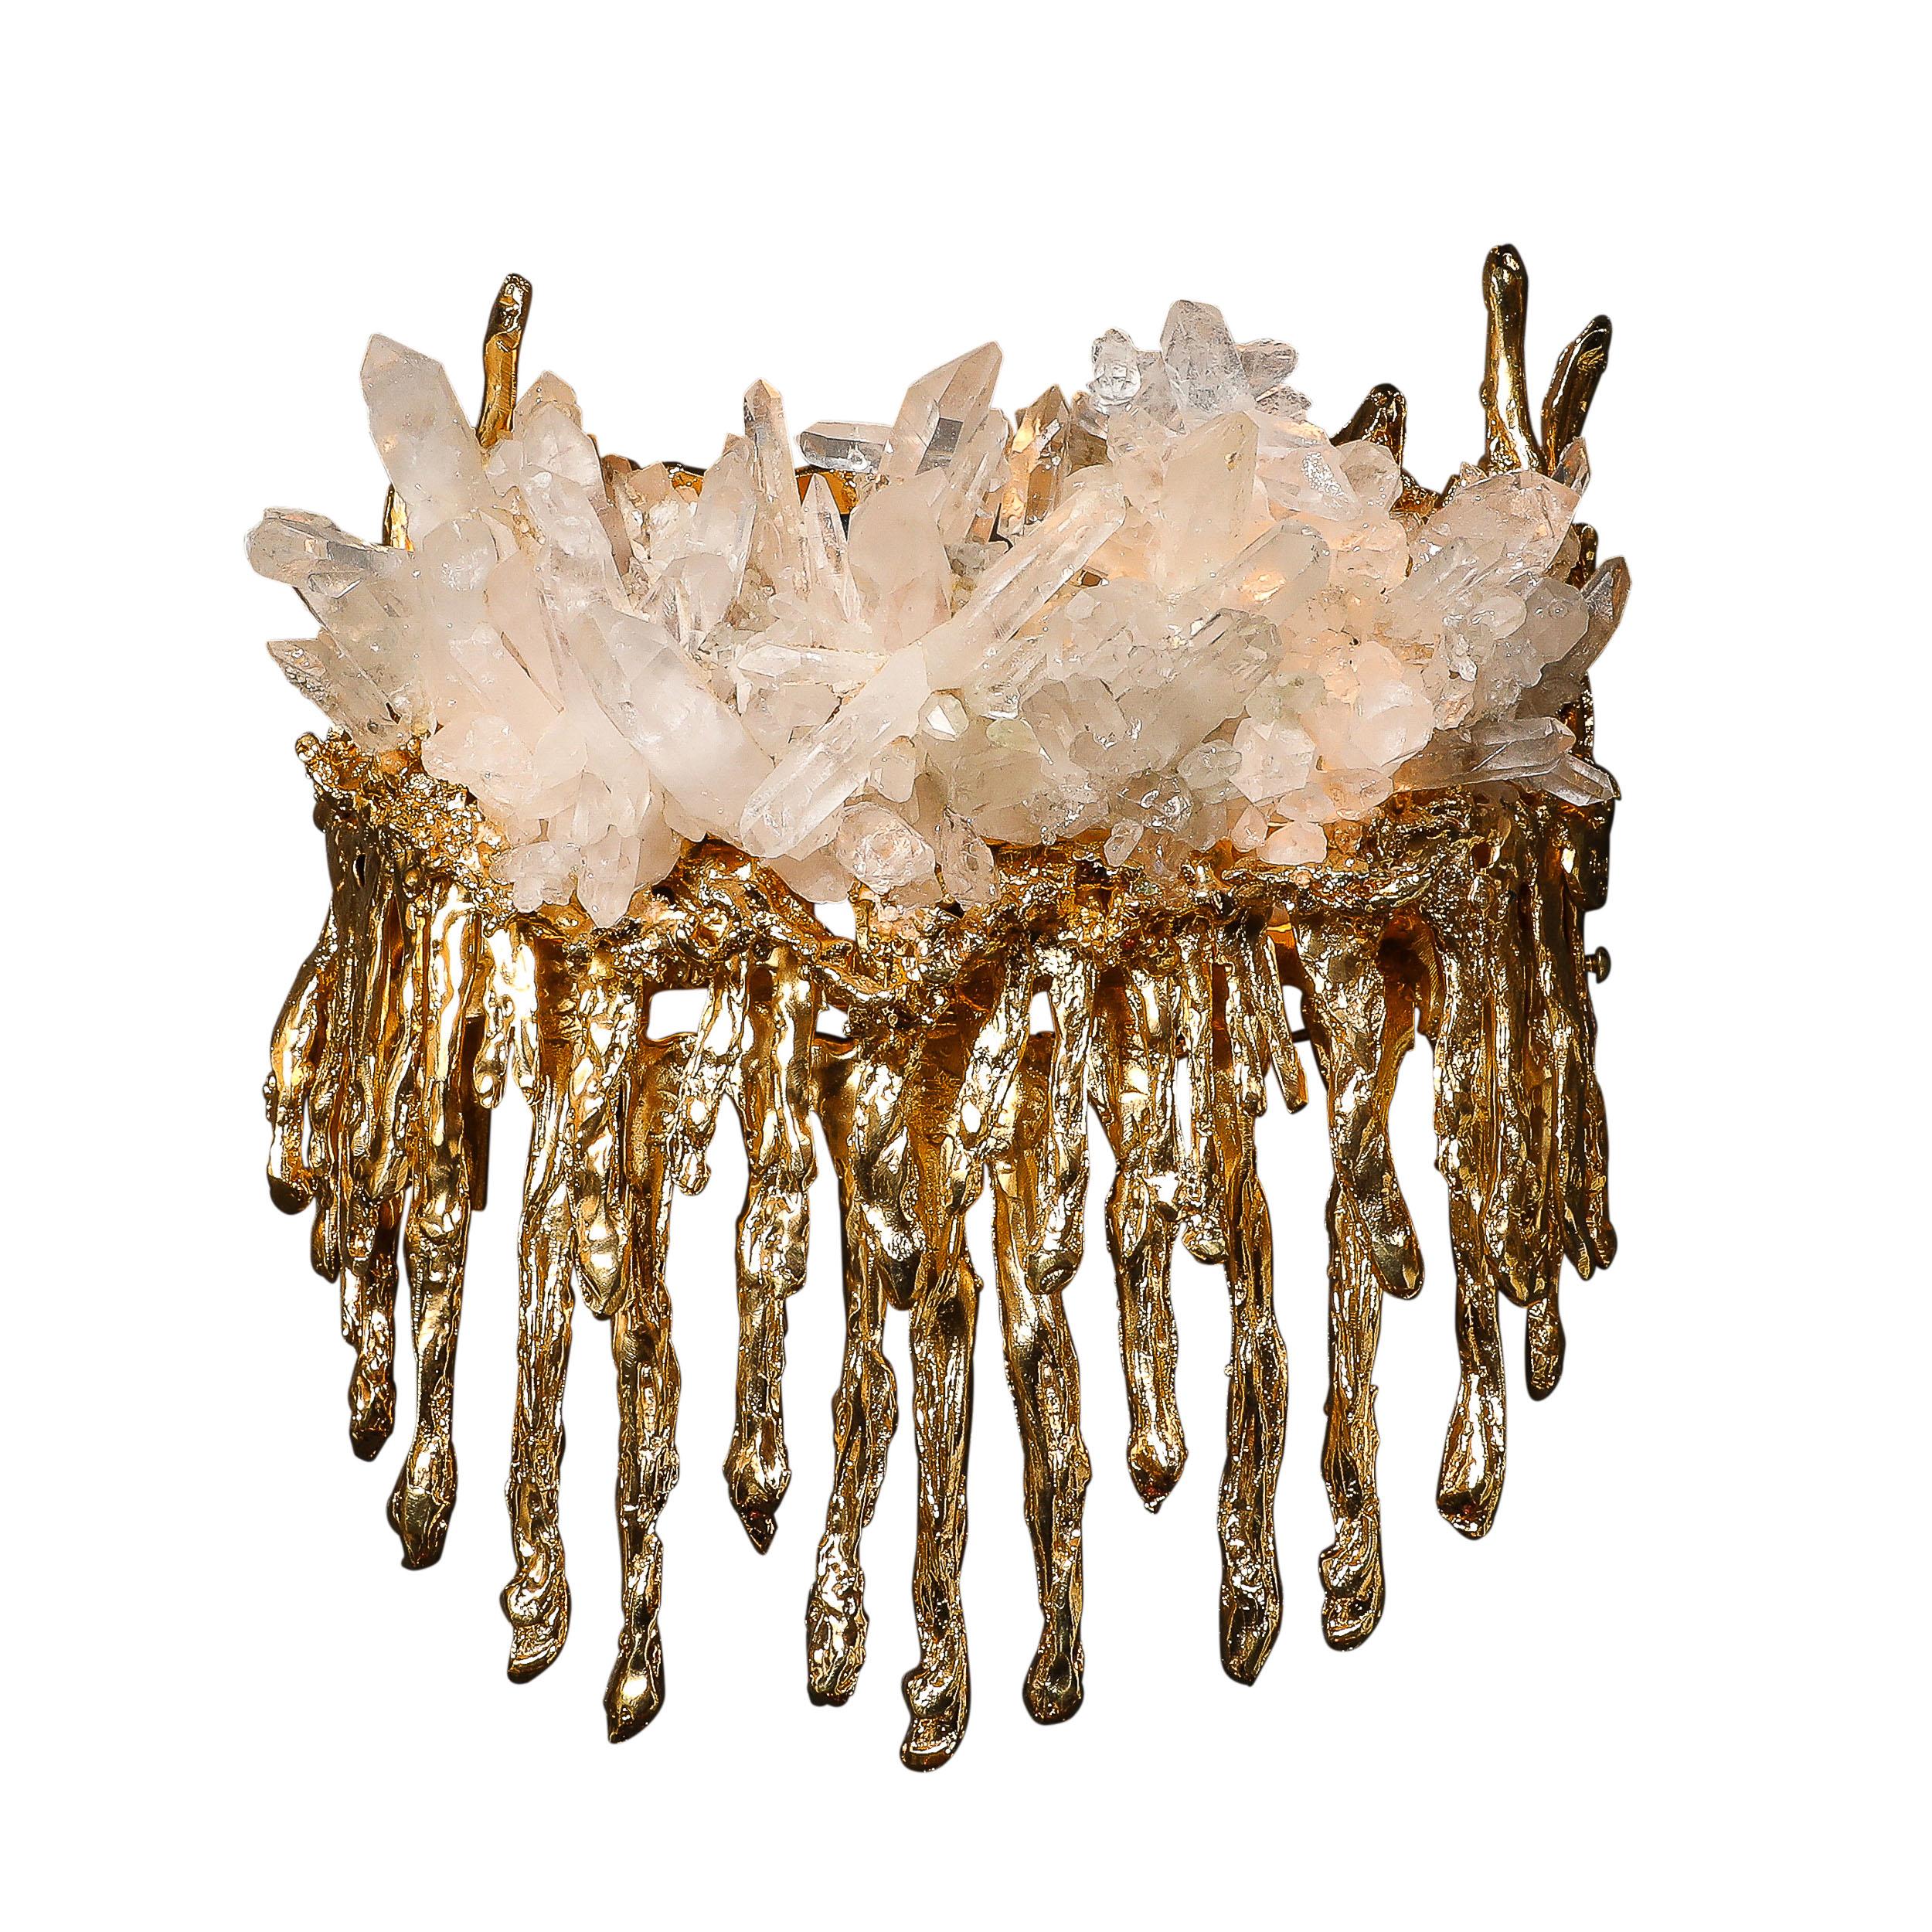 This stunningly ornate Pair of Modernist Sconces in Exploded 24Karat Gilt Bronze and Quartz Crystal is by the esteemed artist and designer Claude Boeltz and originates from France during the 20th Century. Featuring a central cluster of quartz